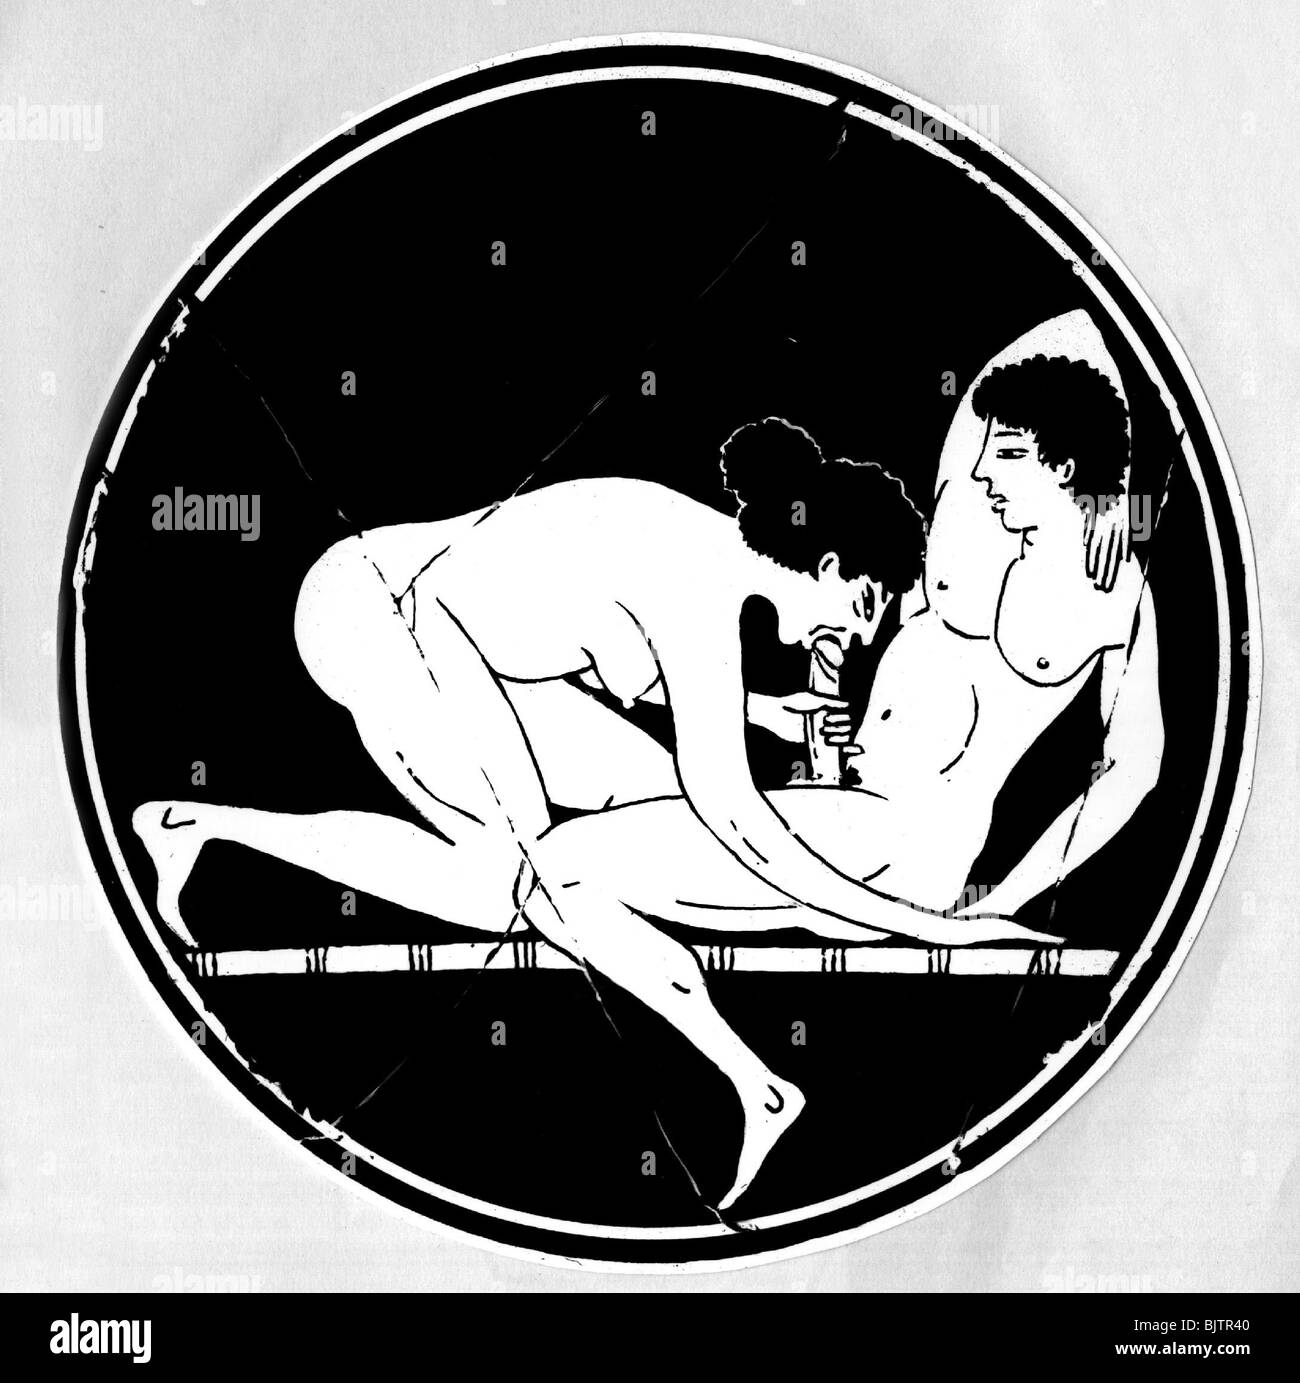 people, love / sex / eroticism, woman and man having oral sex, illustration on an Attic bowl, penis, hetaera, prostitute, prostitution, historic, historical, fellatio, Ancient World, ancient world, women, female, men, male pic